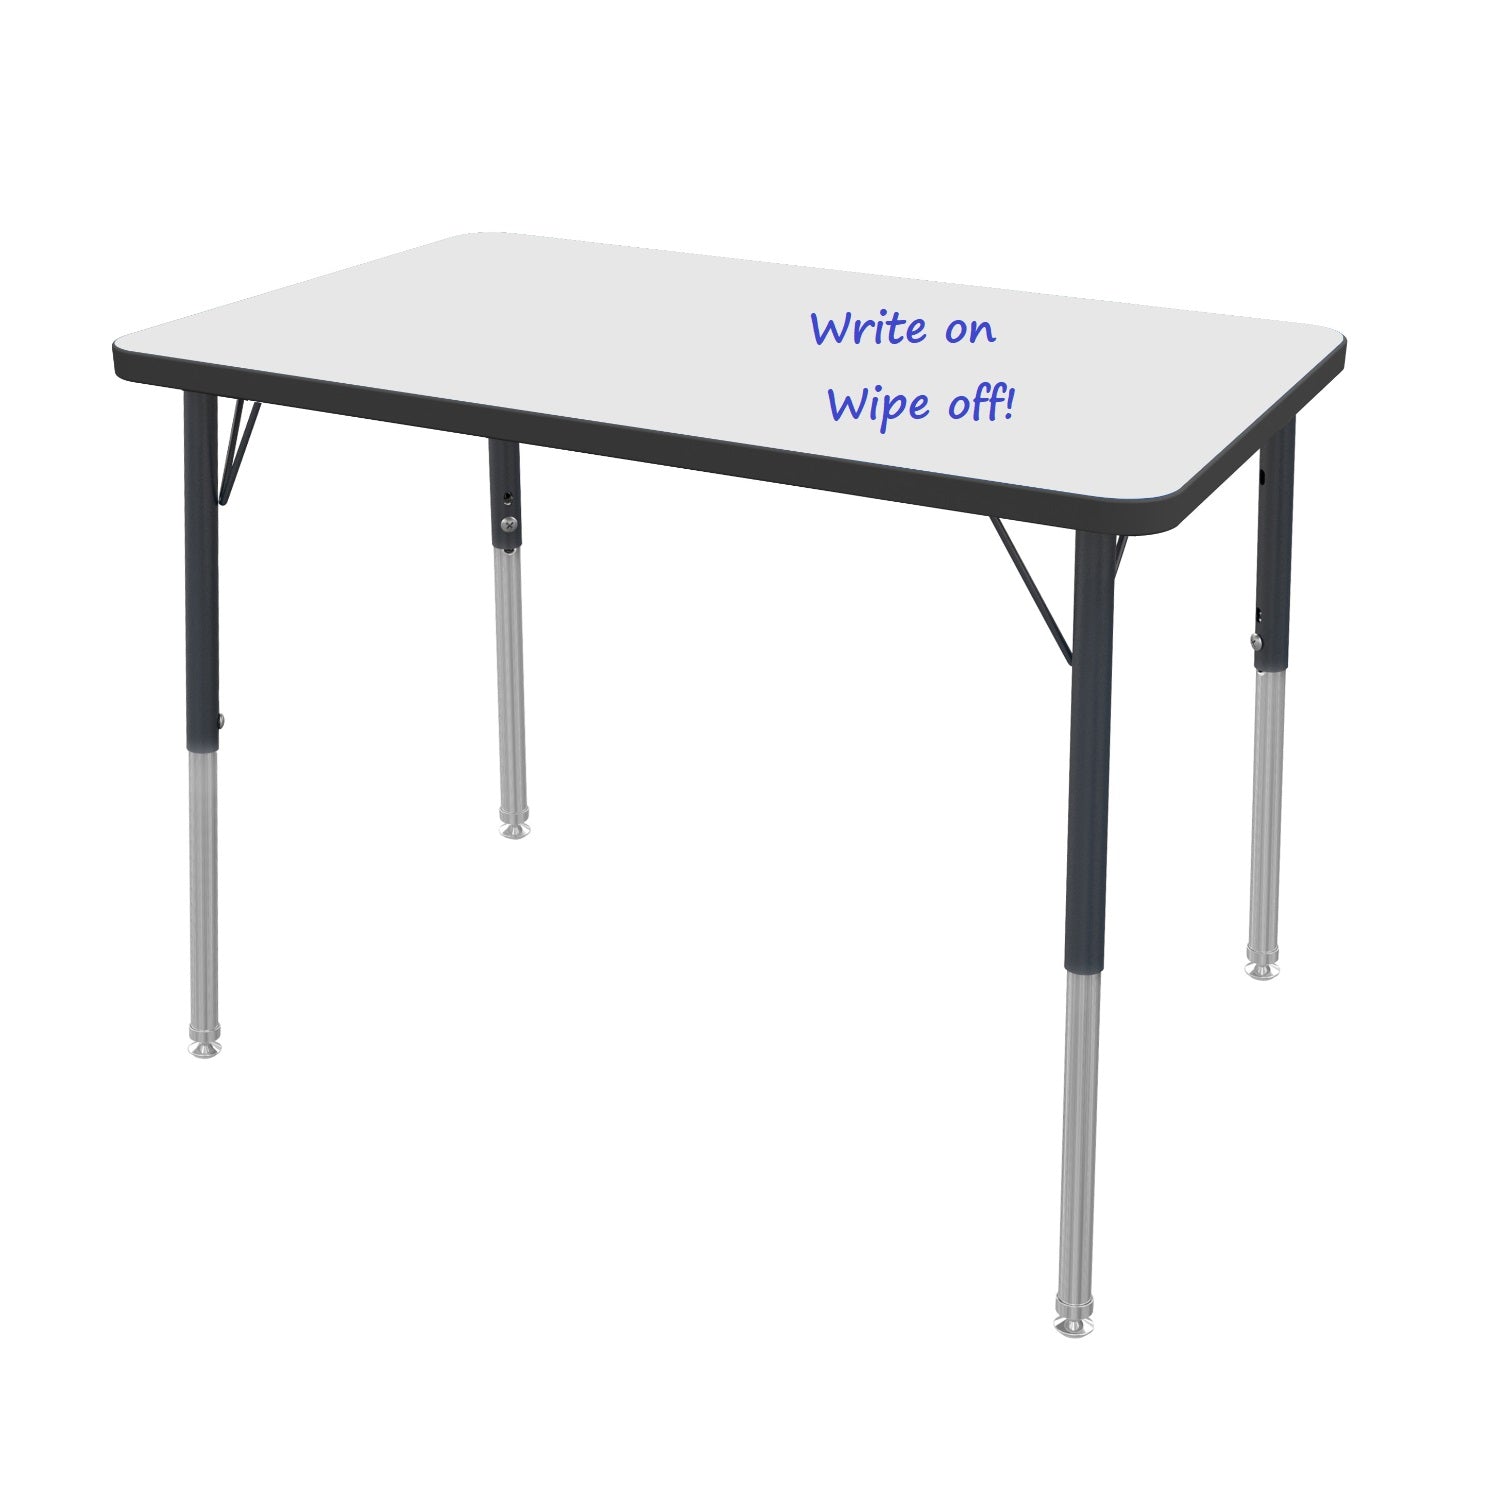 MG Series Adjustable Height Activity Table with White Dry Erase Markerboard Top, 24" x 36" Rectangle